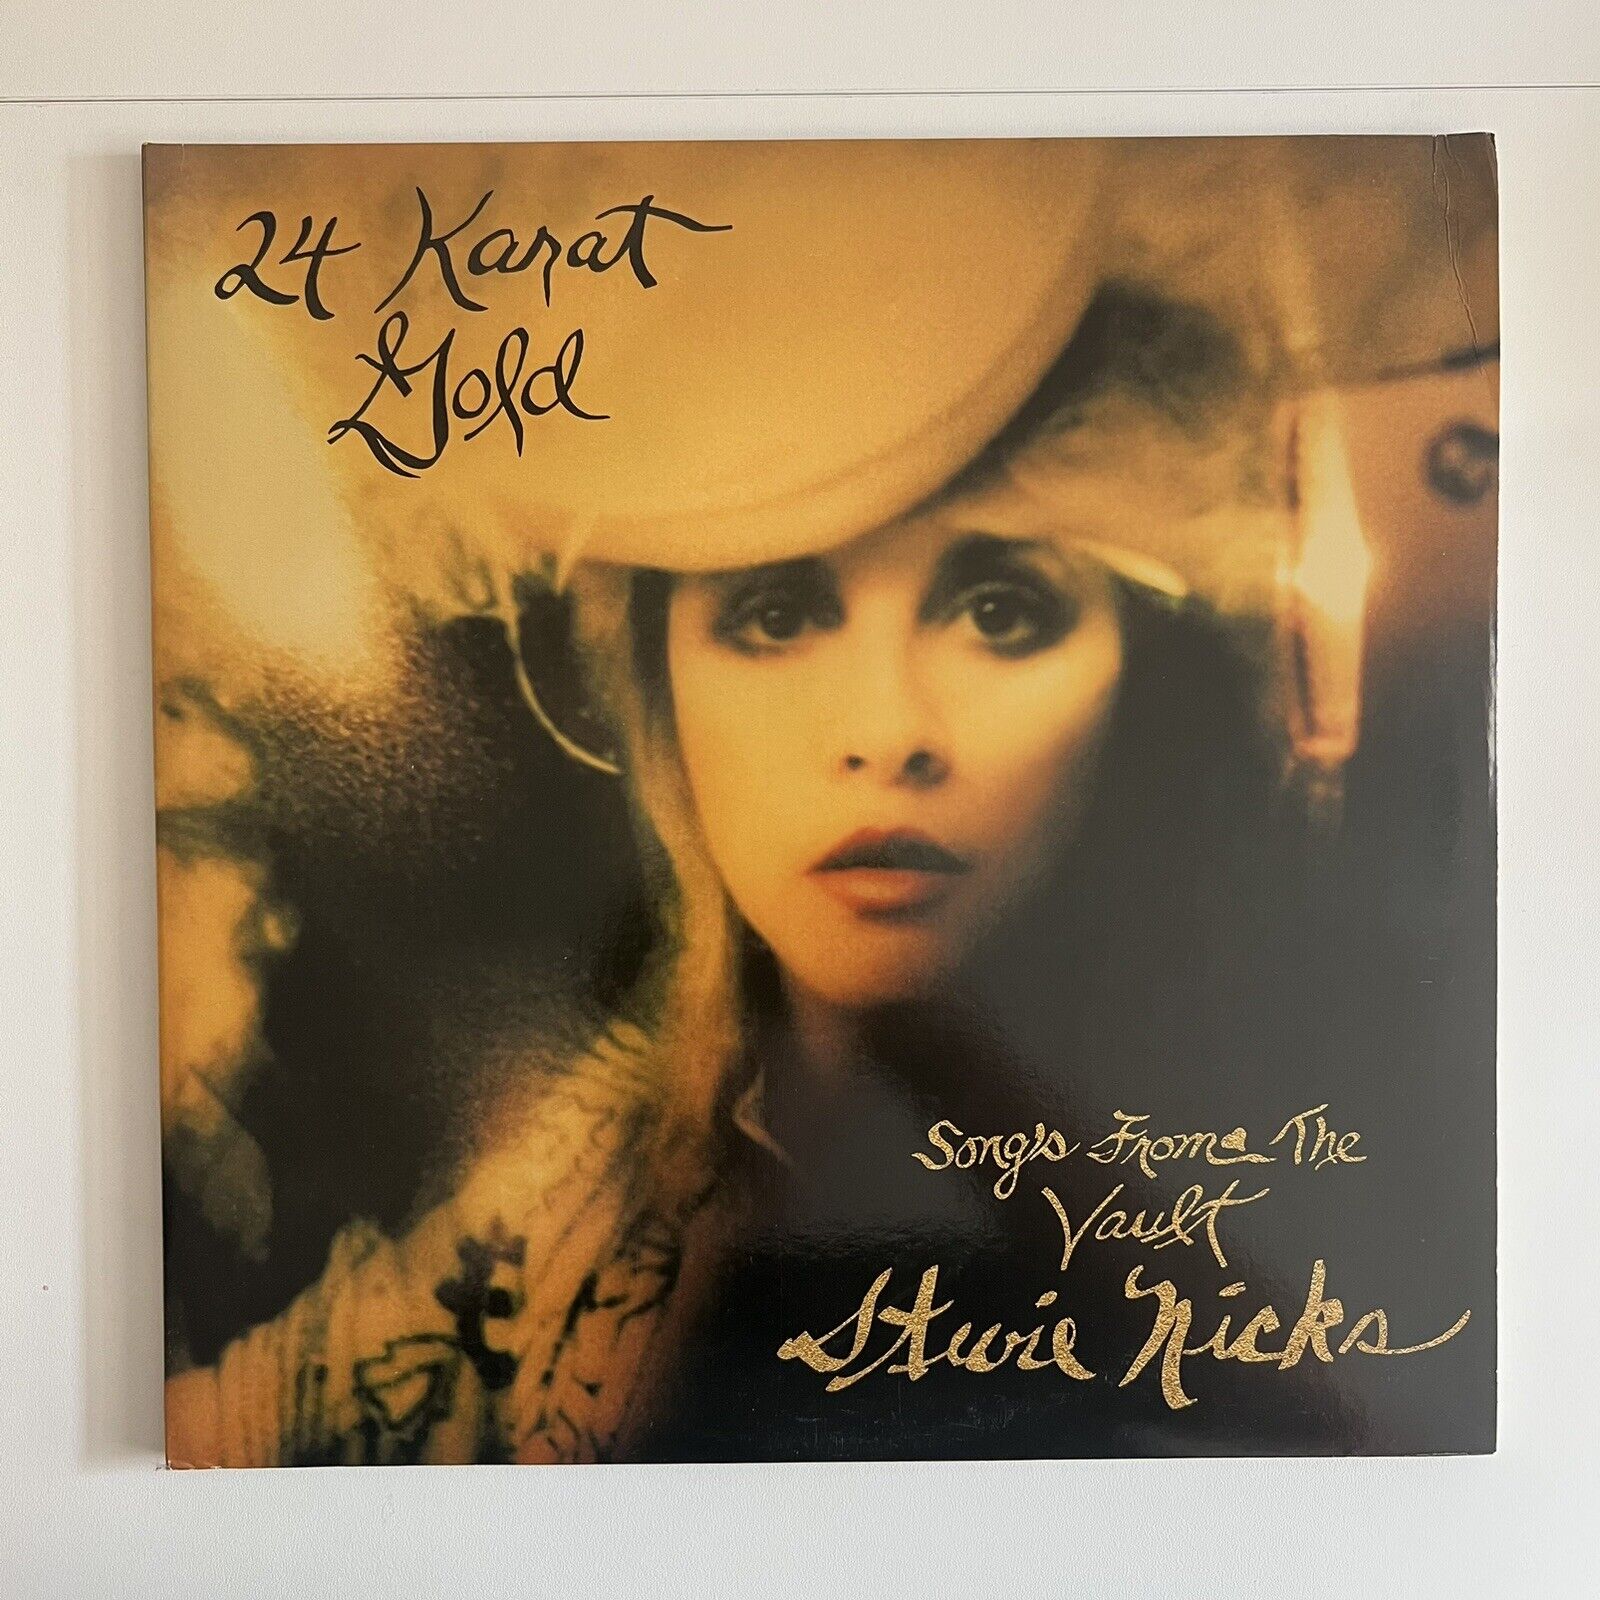 24 Karat Gold - Songs from the Vault by Nicks, Stevie (Record, 2014)